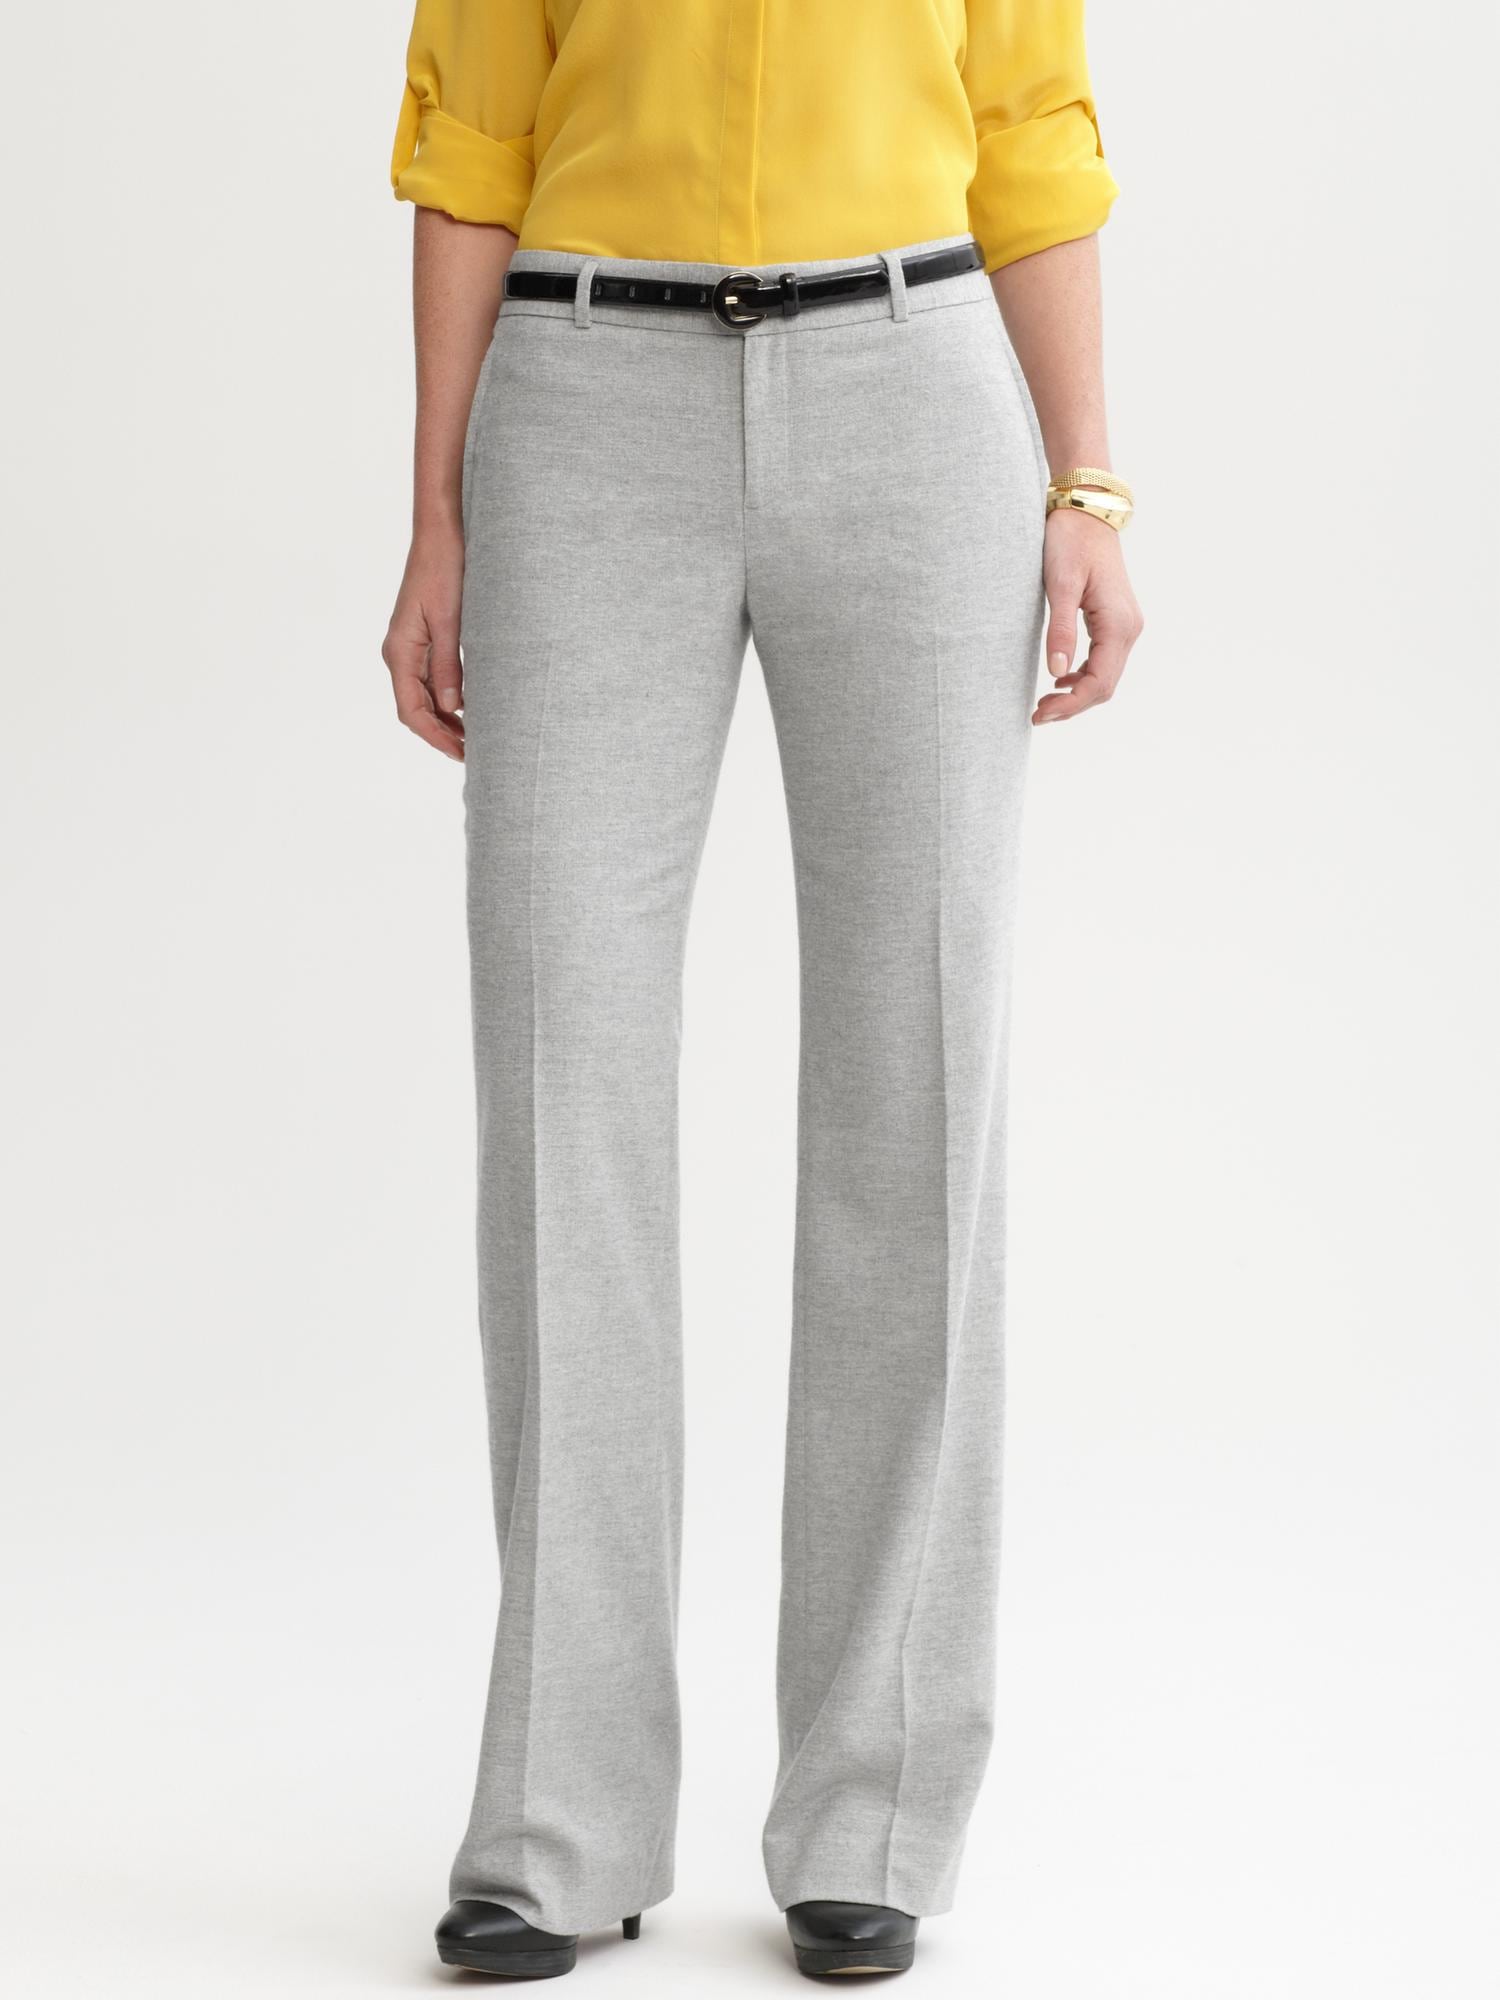 Martin fit grey flannel trouser